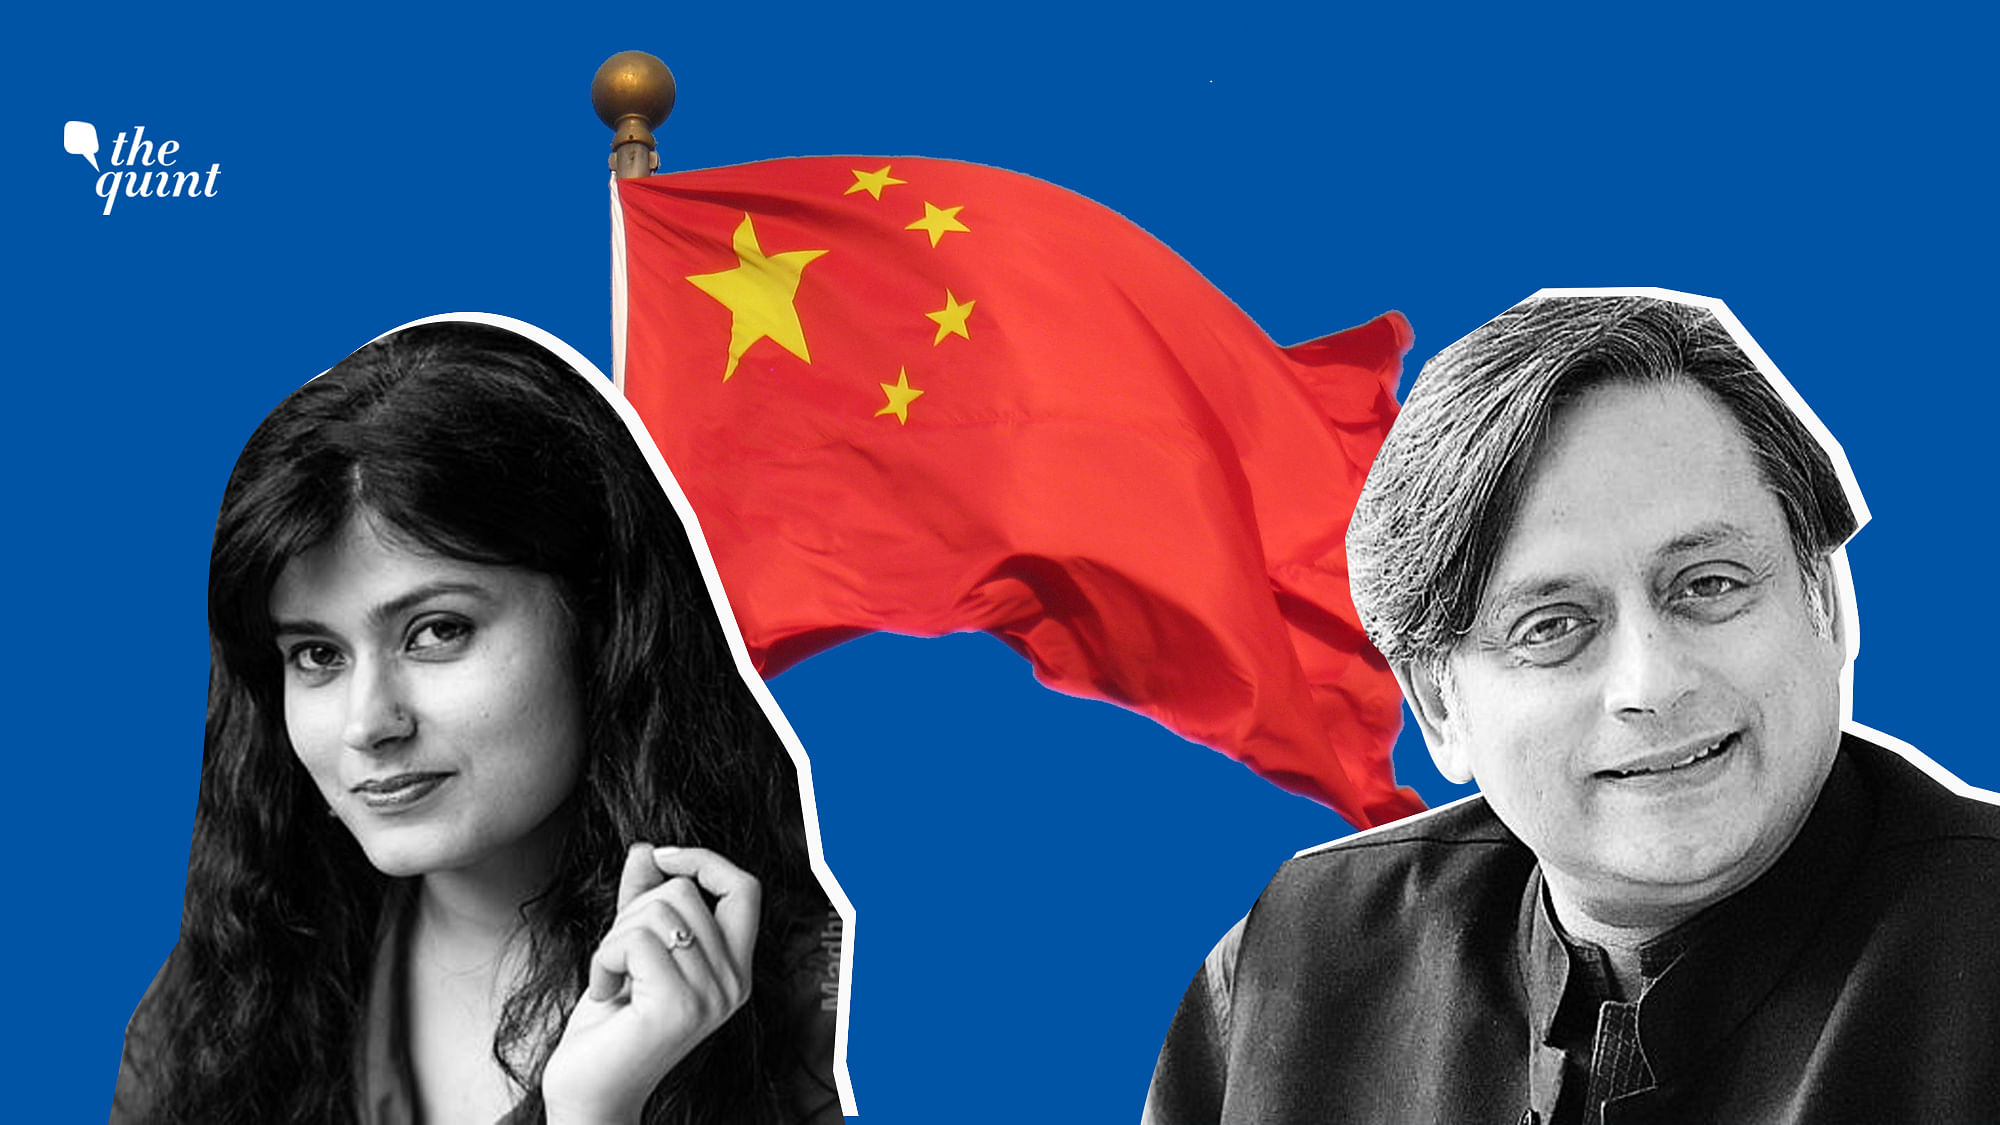 Congress MP Shashi Tharoor speaks exclusively to The Quint about India-China tensions along the LAC. 